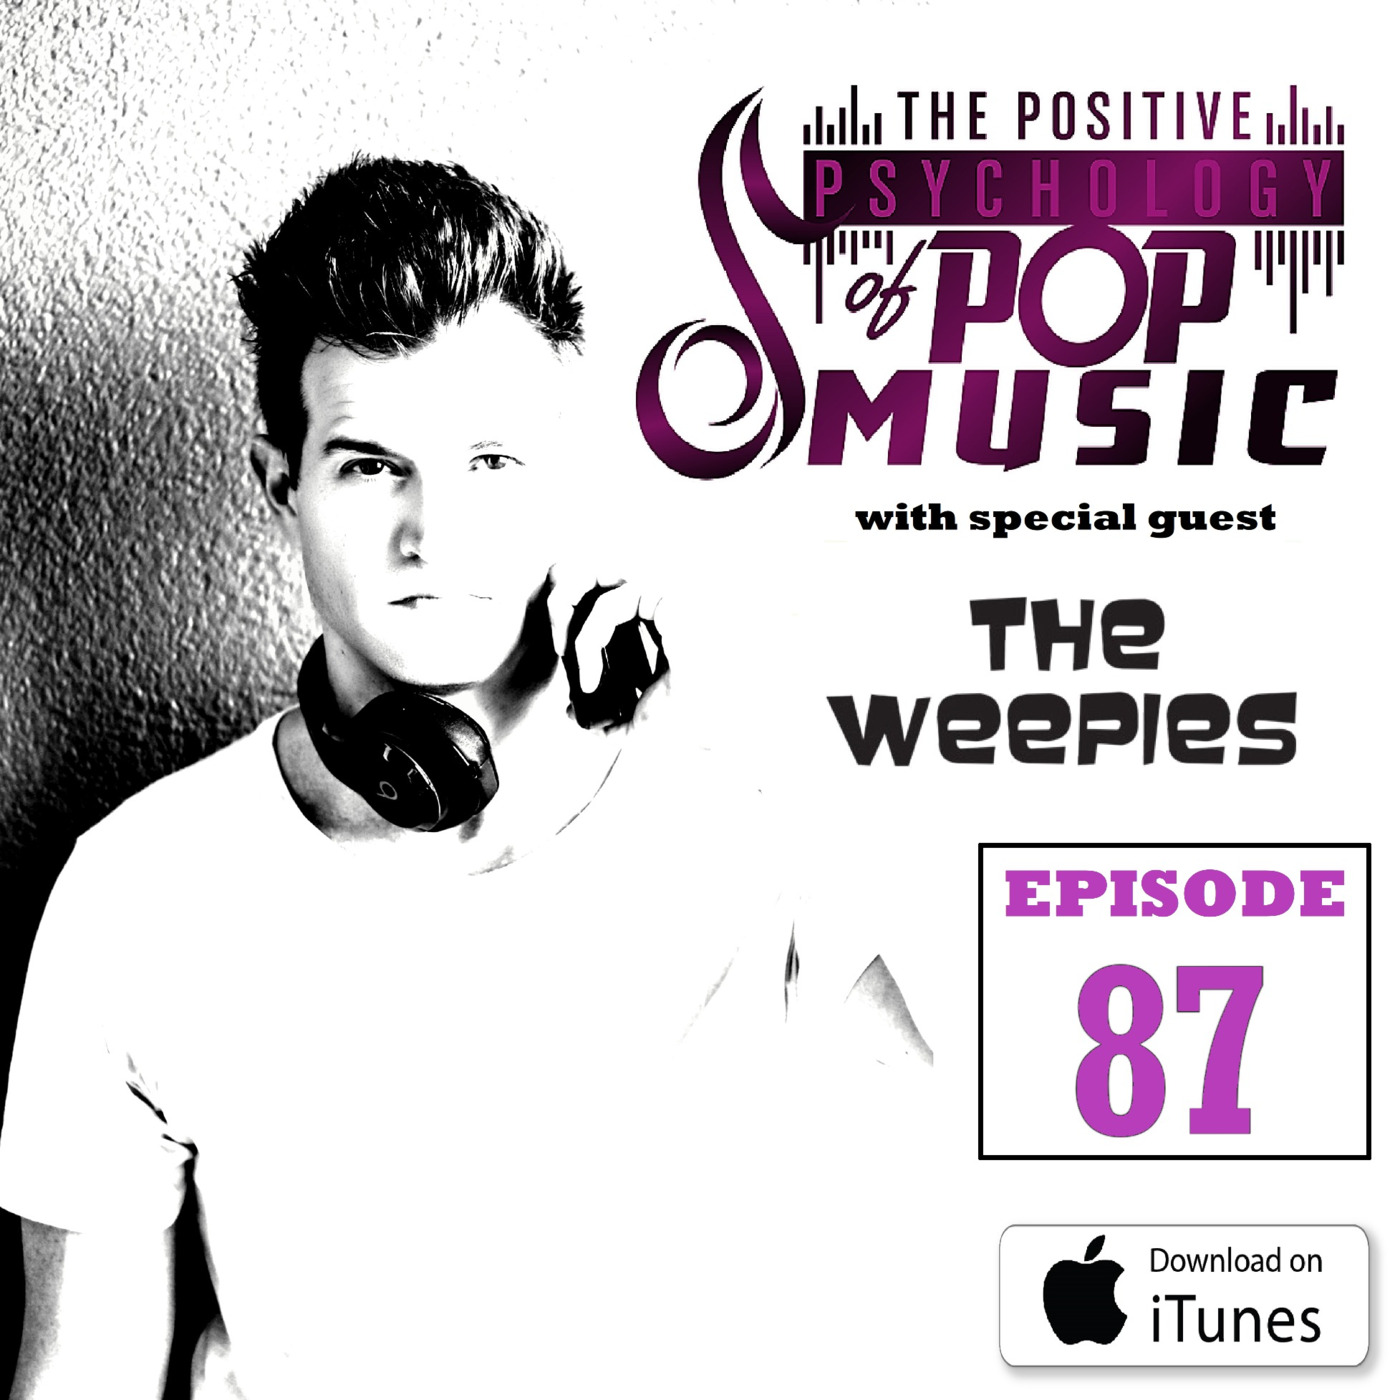 The Weepies on The Positive Psychology of Pop Music!